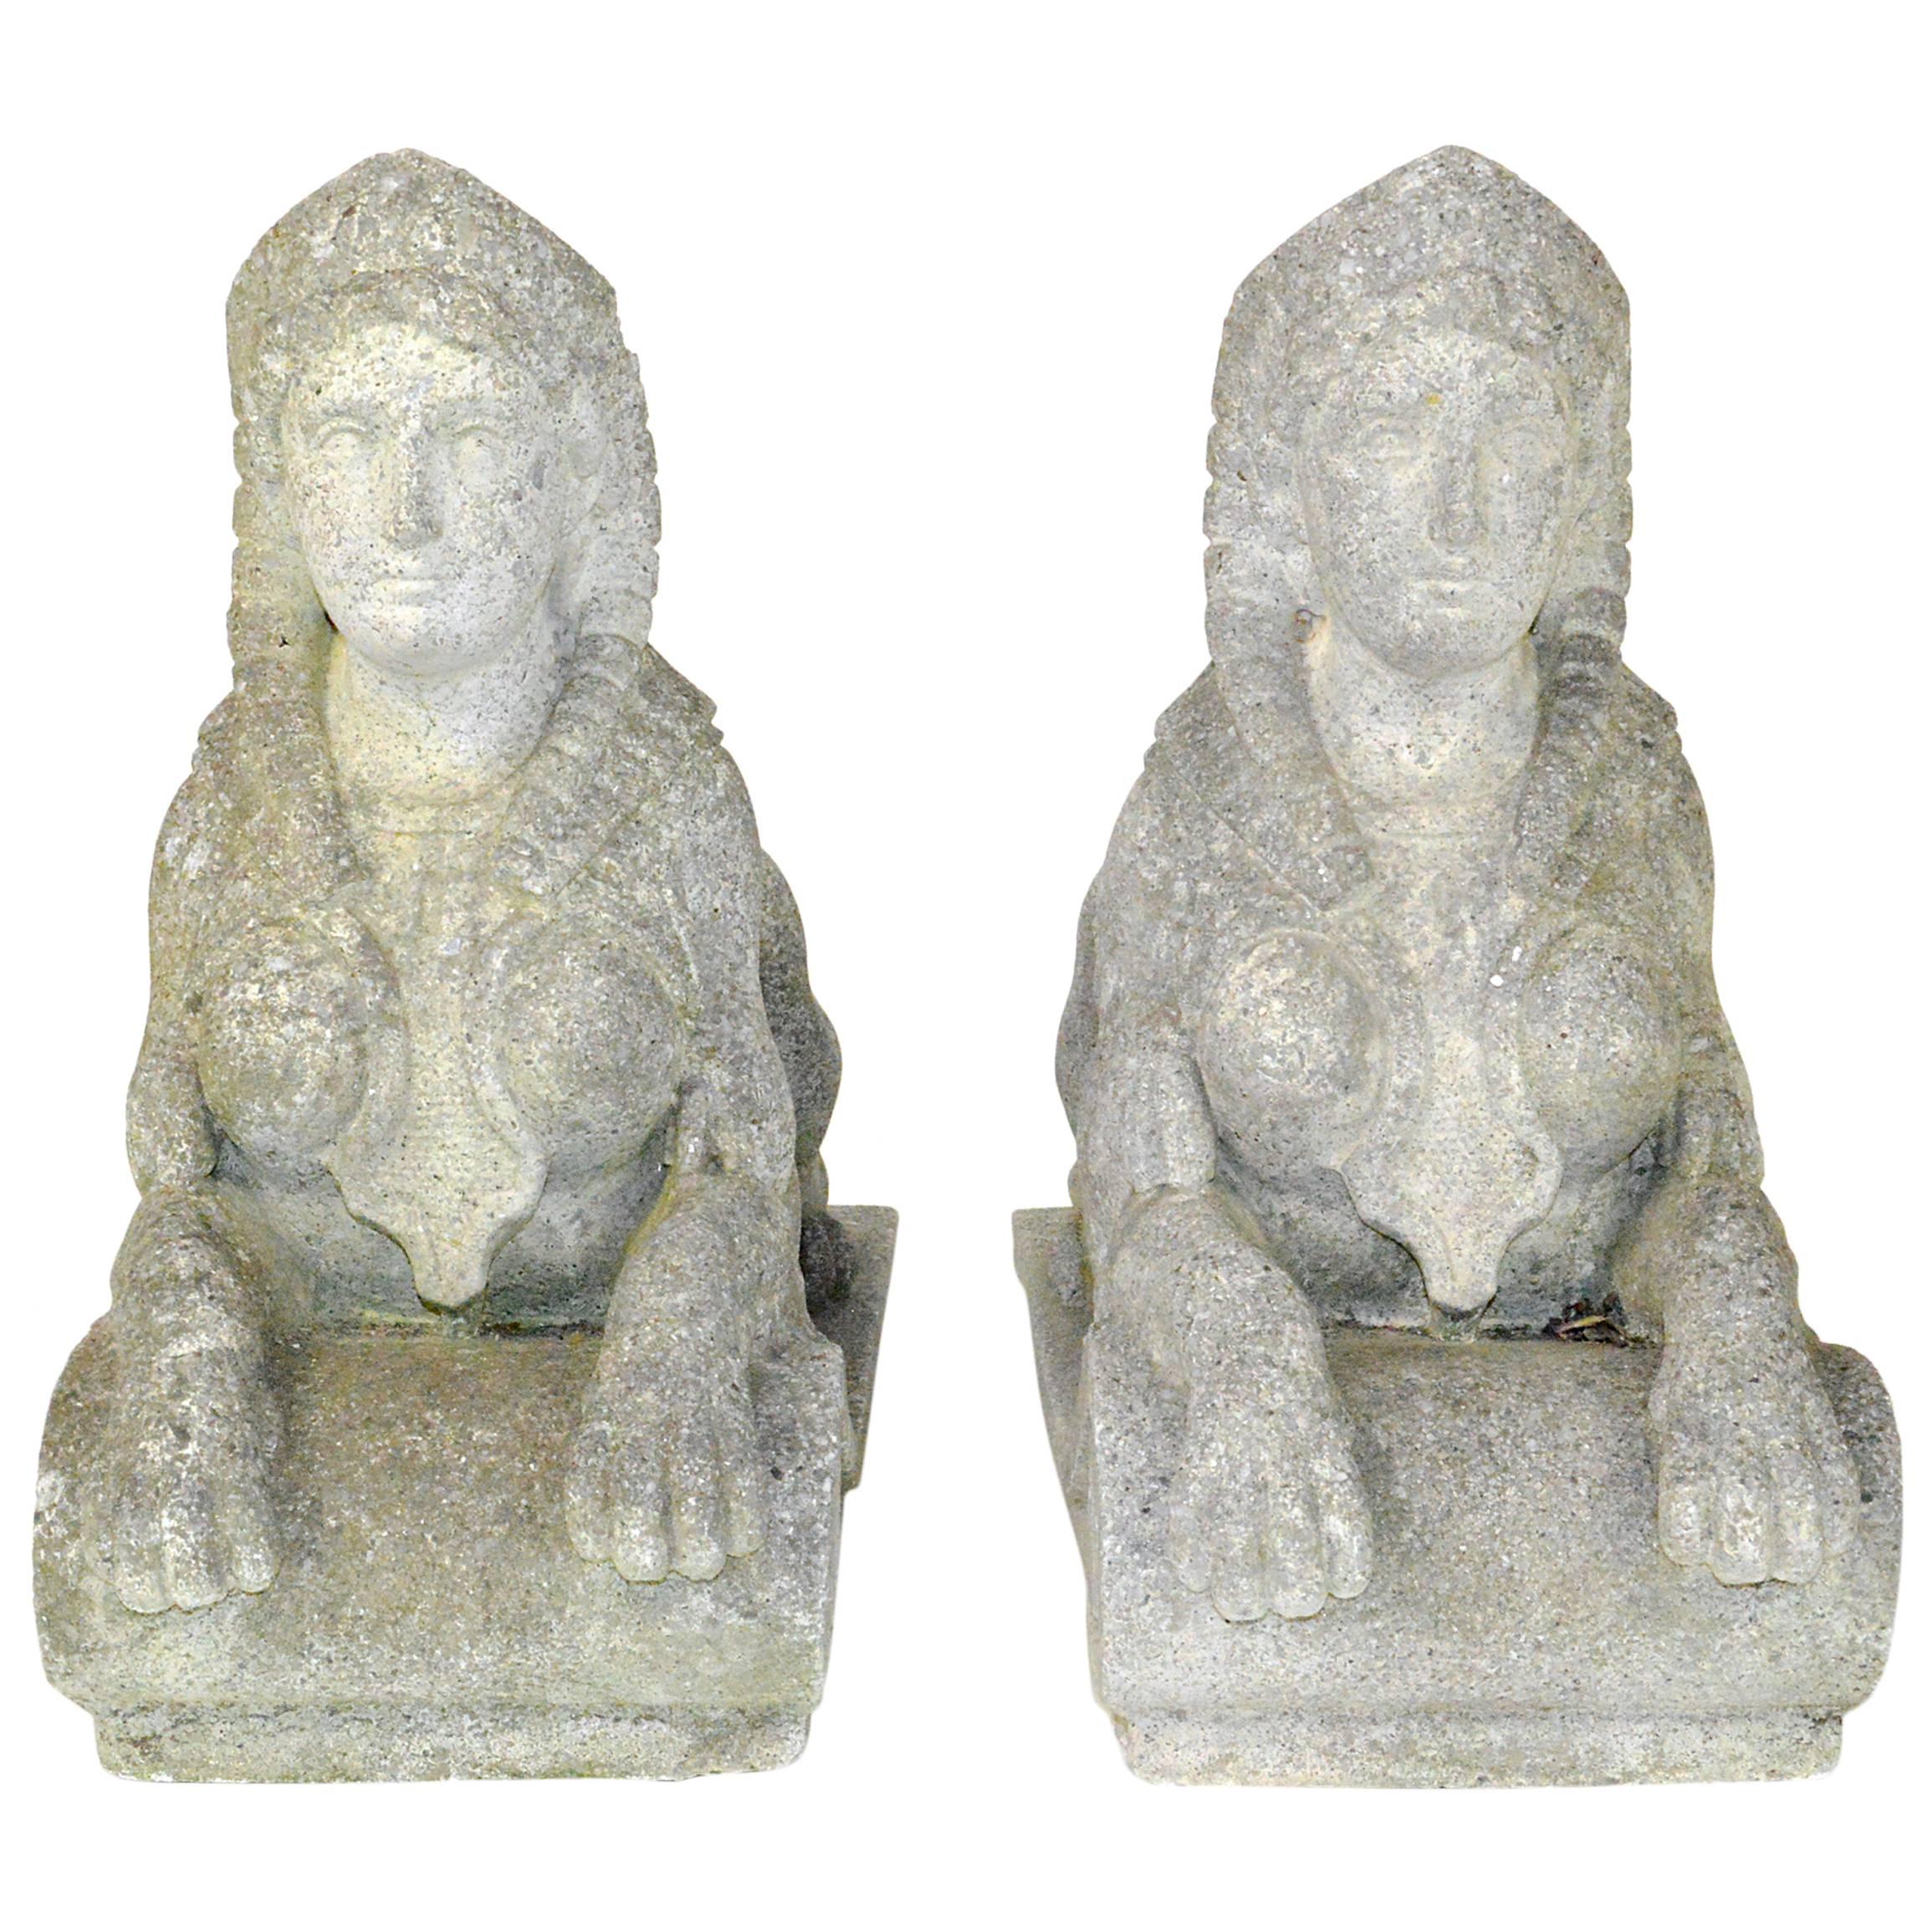 Pair of Egyptian Revival Carved Stone Garden Sphinx